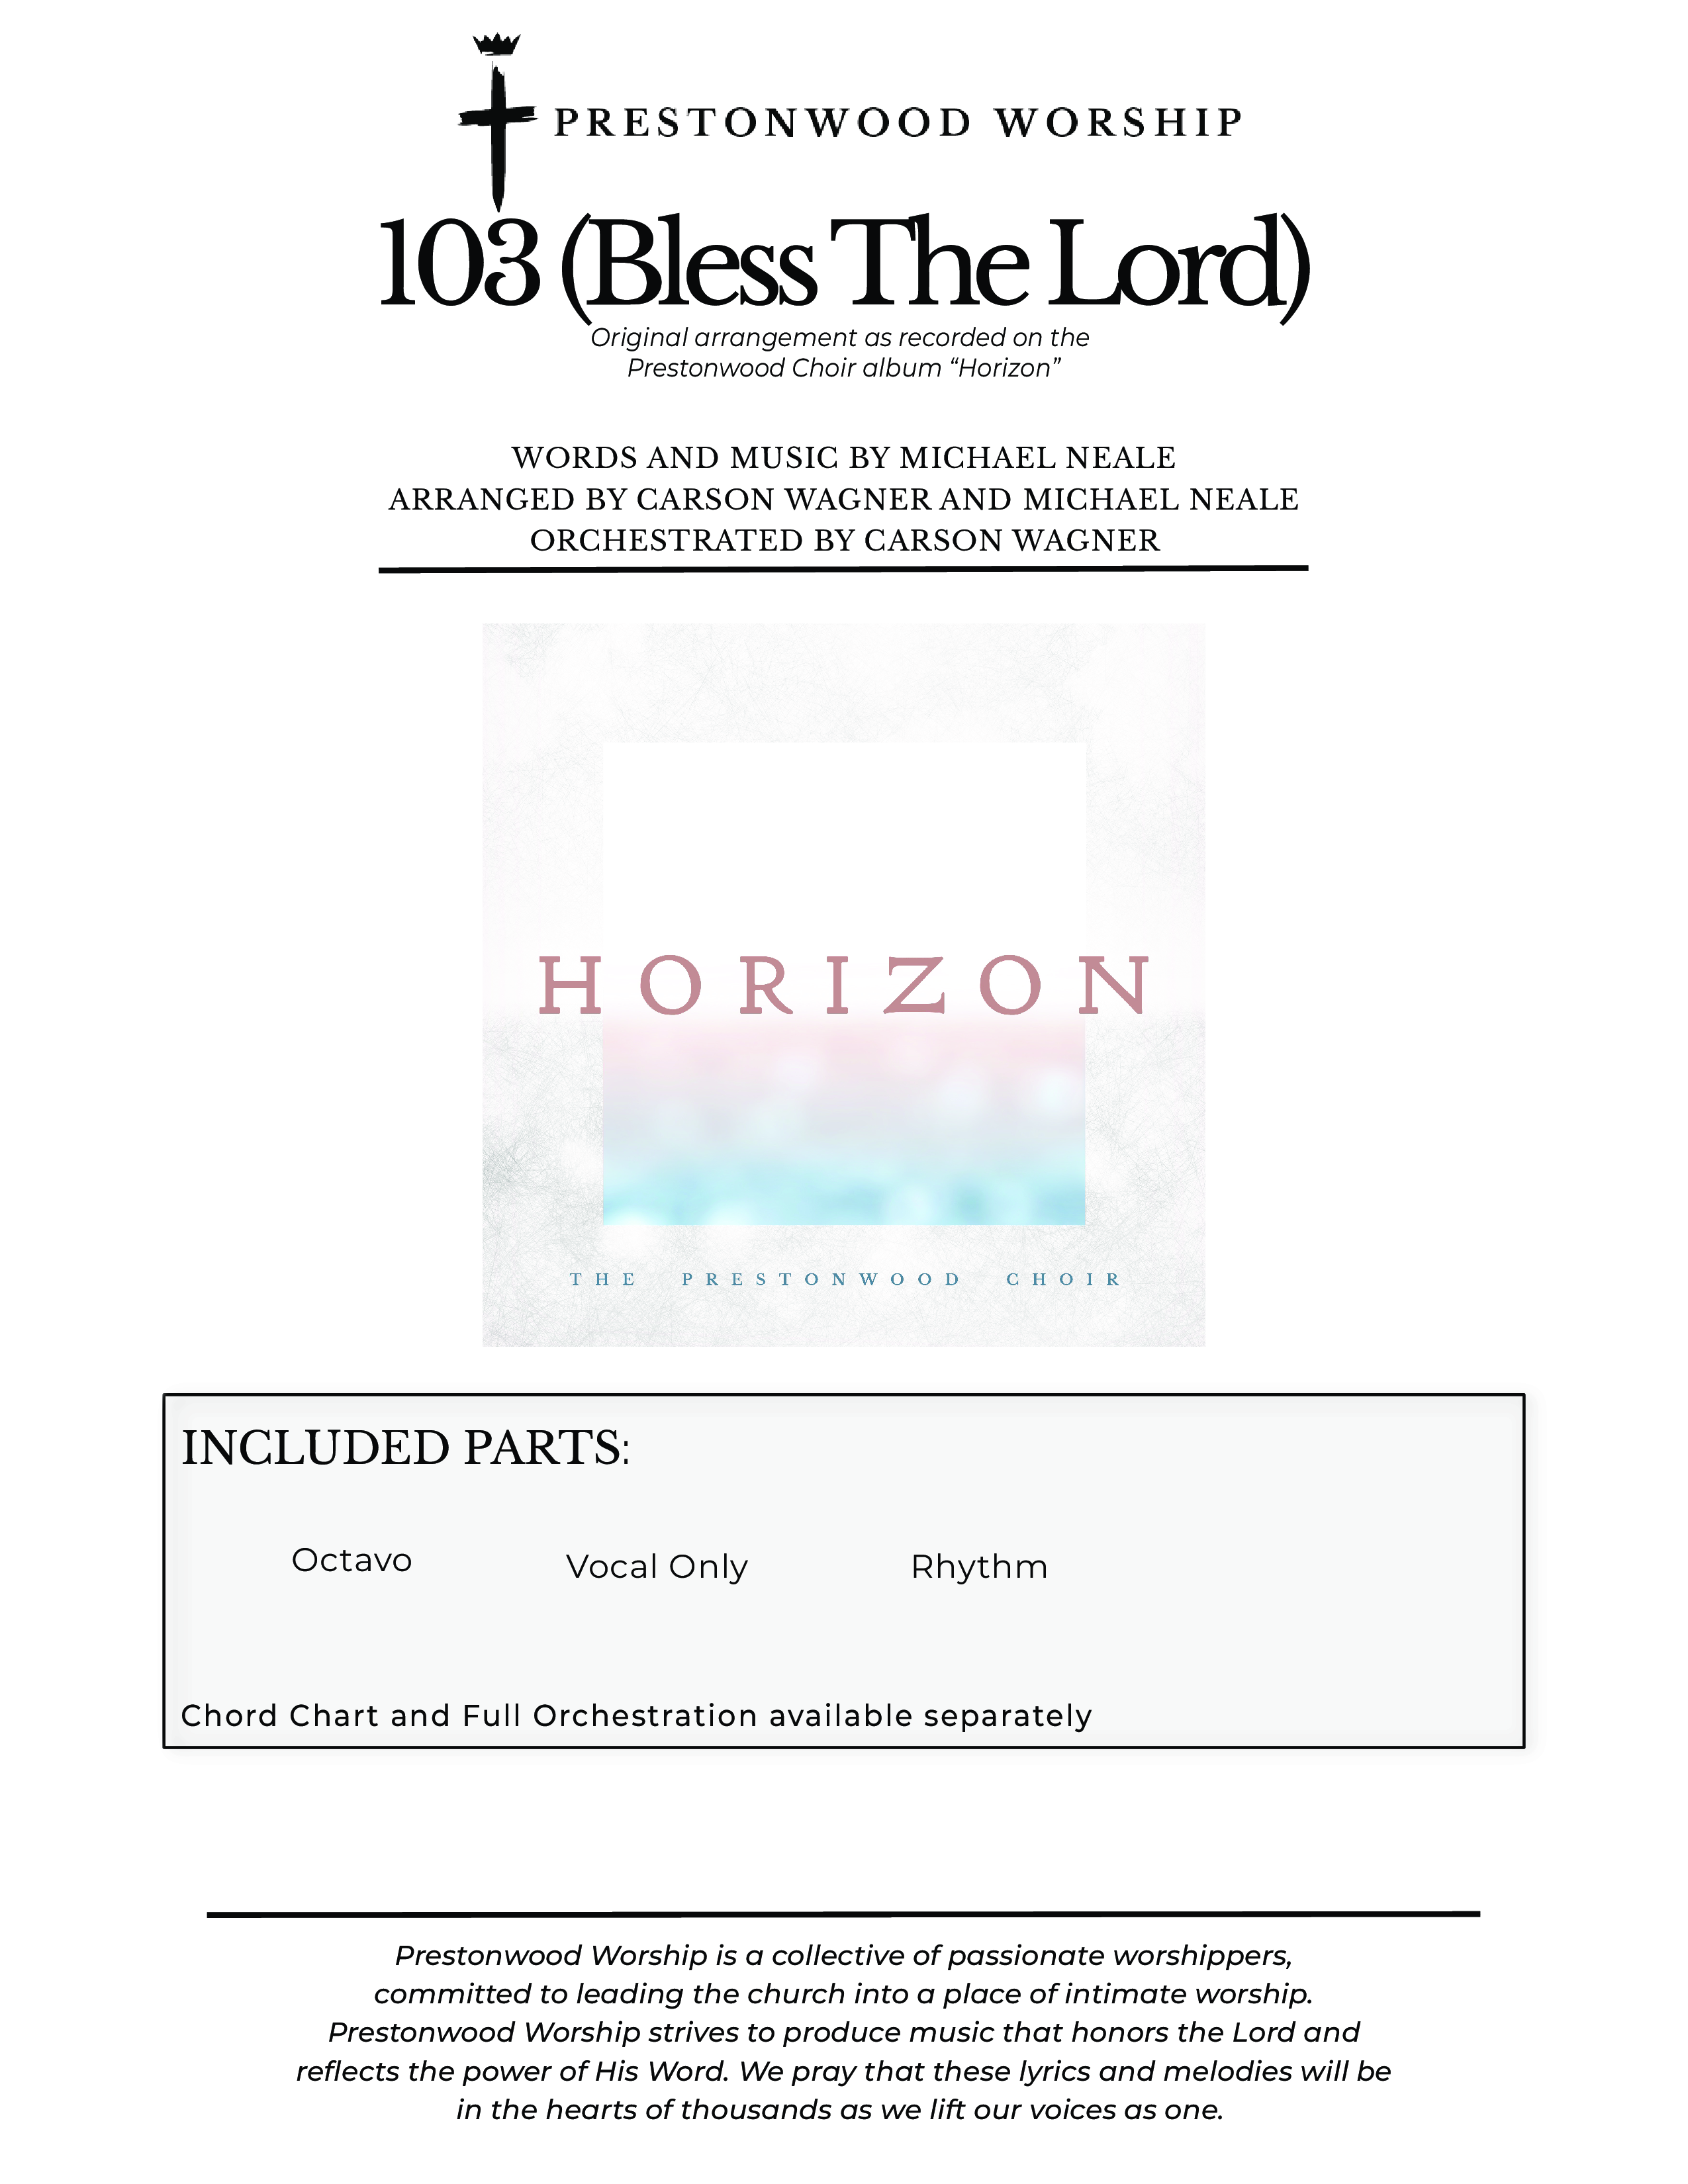 103 (Bless The Lord) (Choral Anthem SATB) Cover Sheet (Prestonwood Worship / Prestonwood Choir / Arr. Michael Neale / Orch. Carson Wagner)